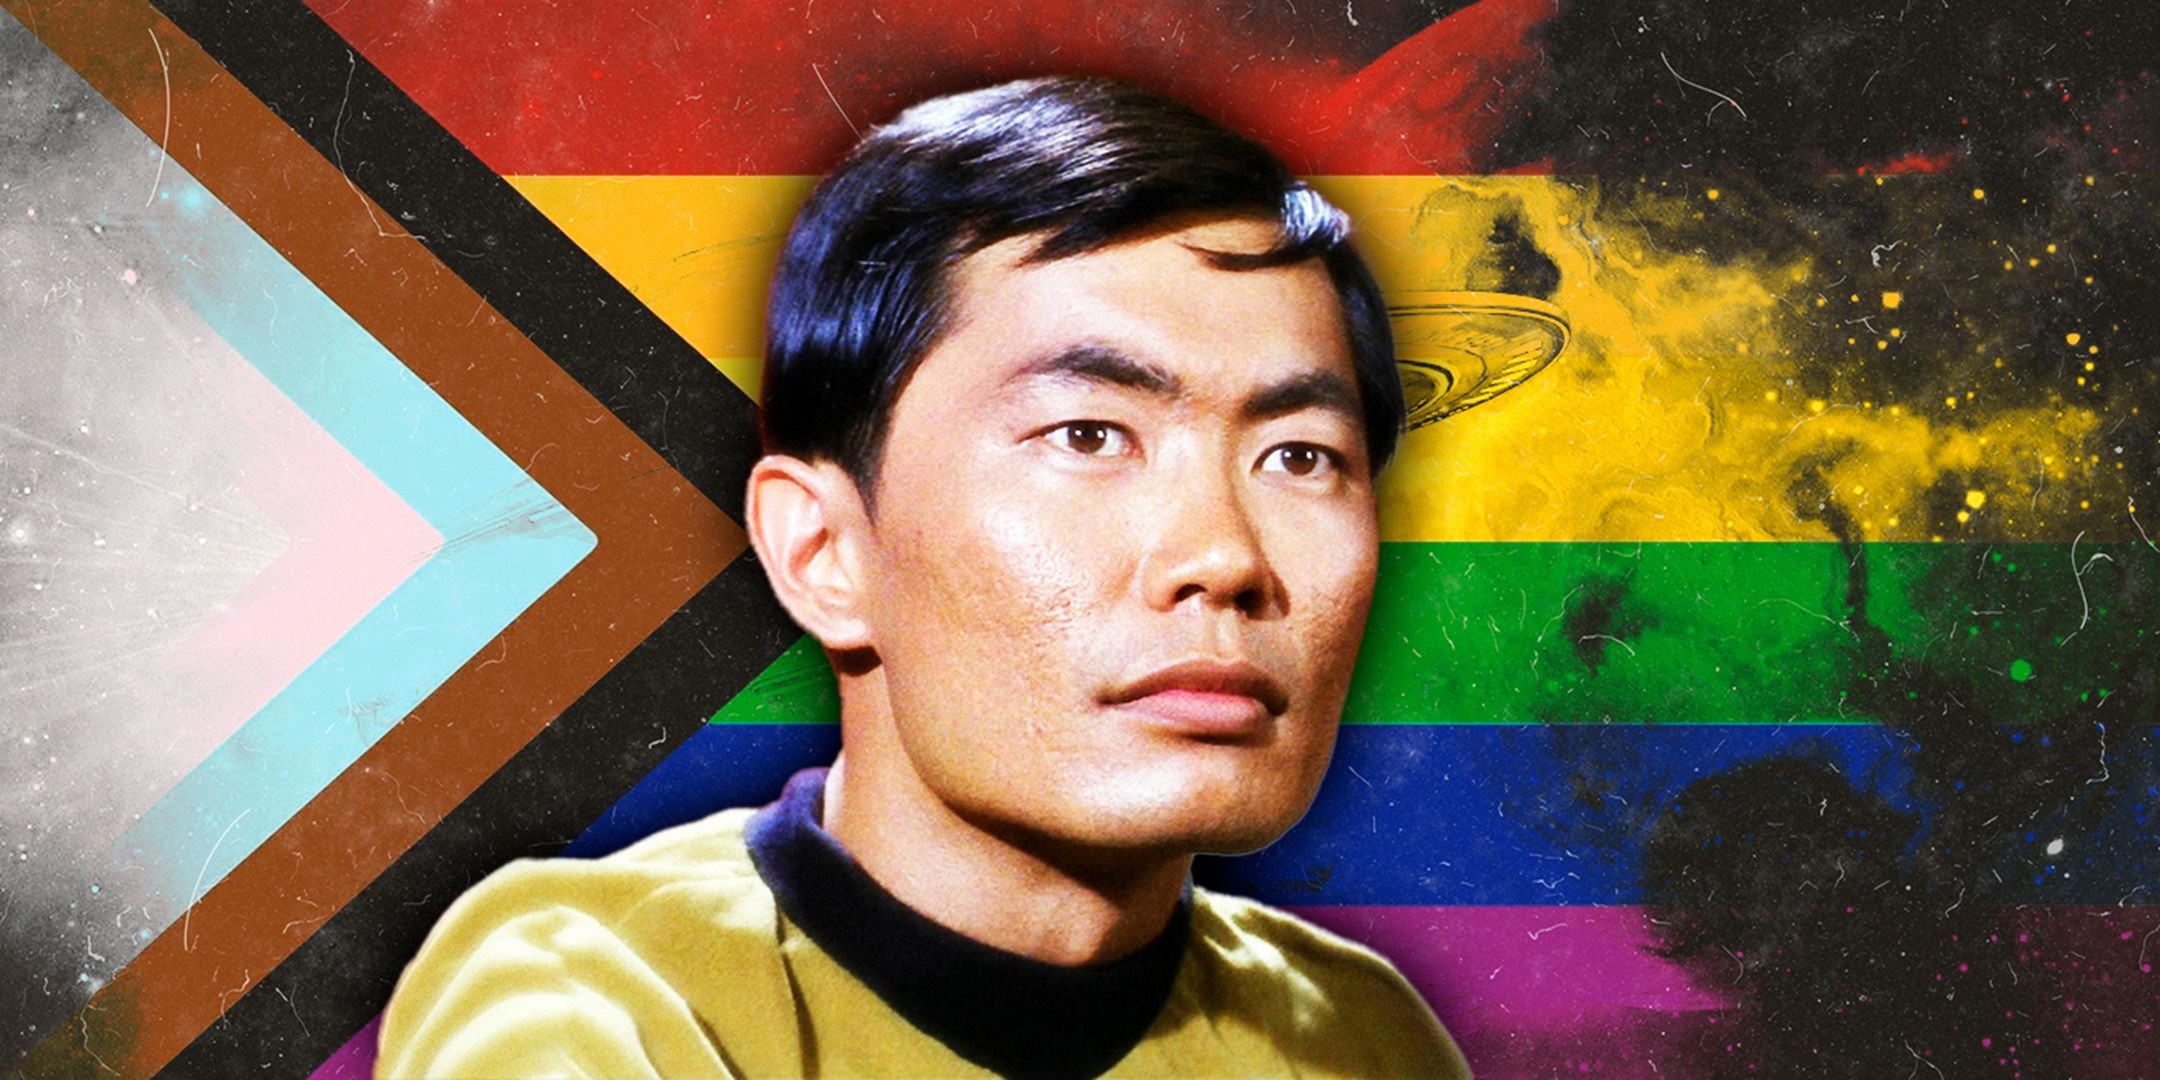 Sulo from Star Trek in front of a gay pride flag